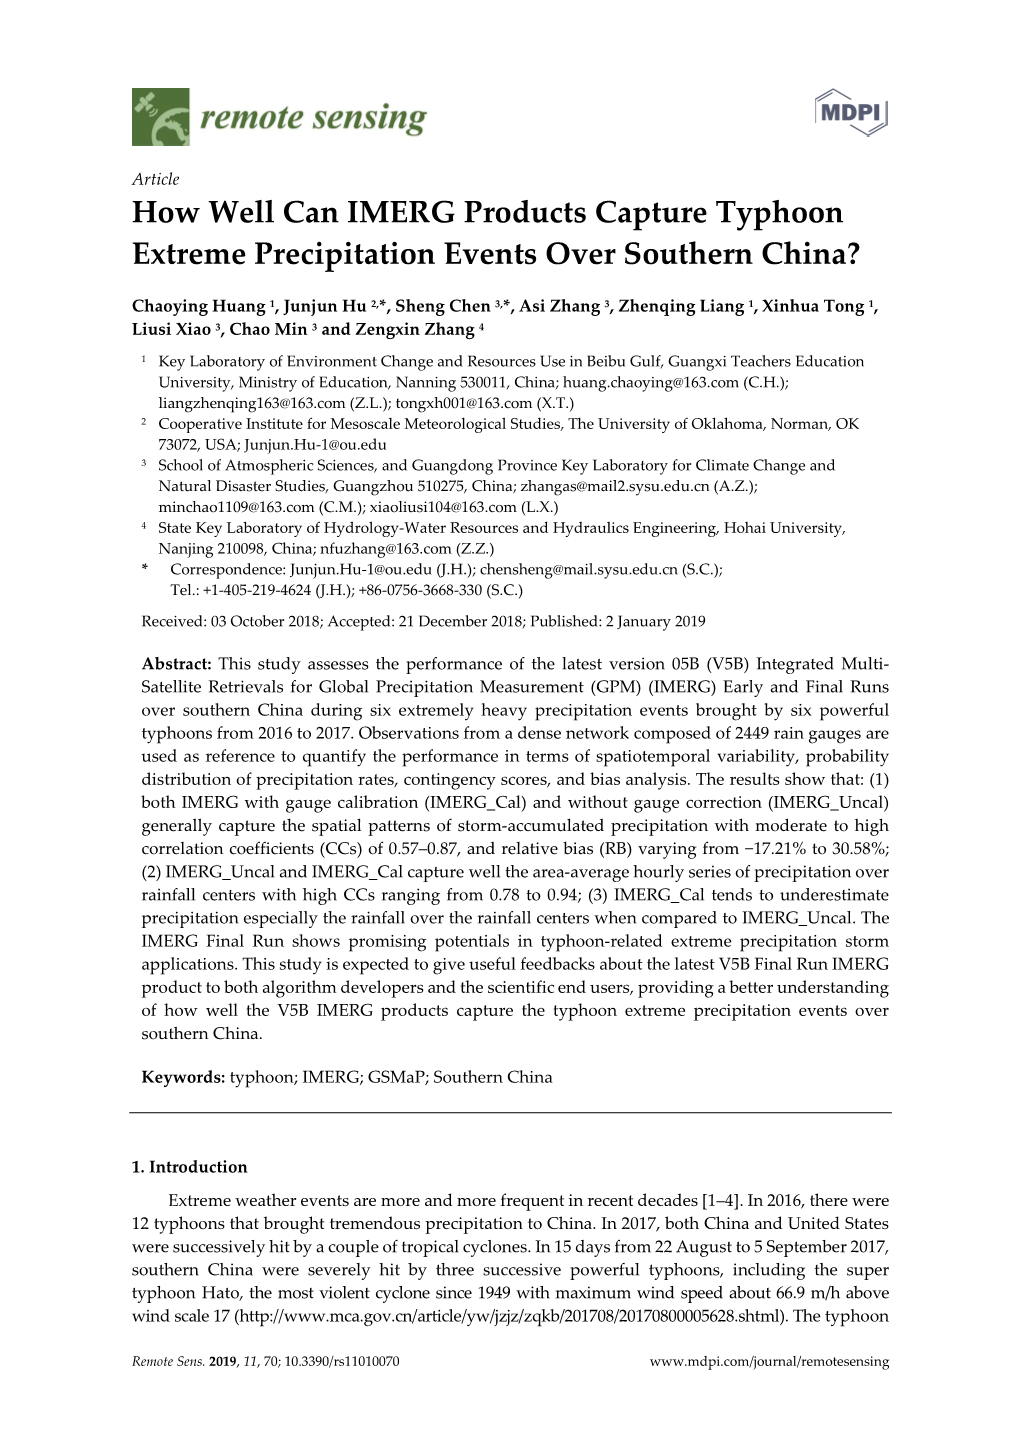 How Well Can IMERG Products Capture Typhoon Extreme Precipitation Events Over Southern China?